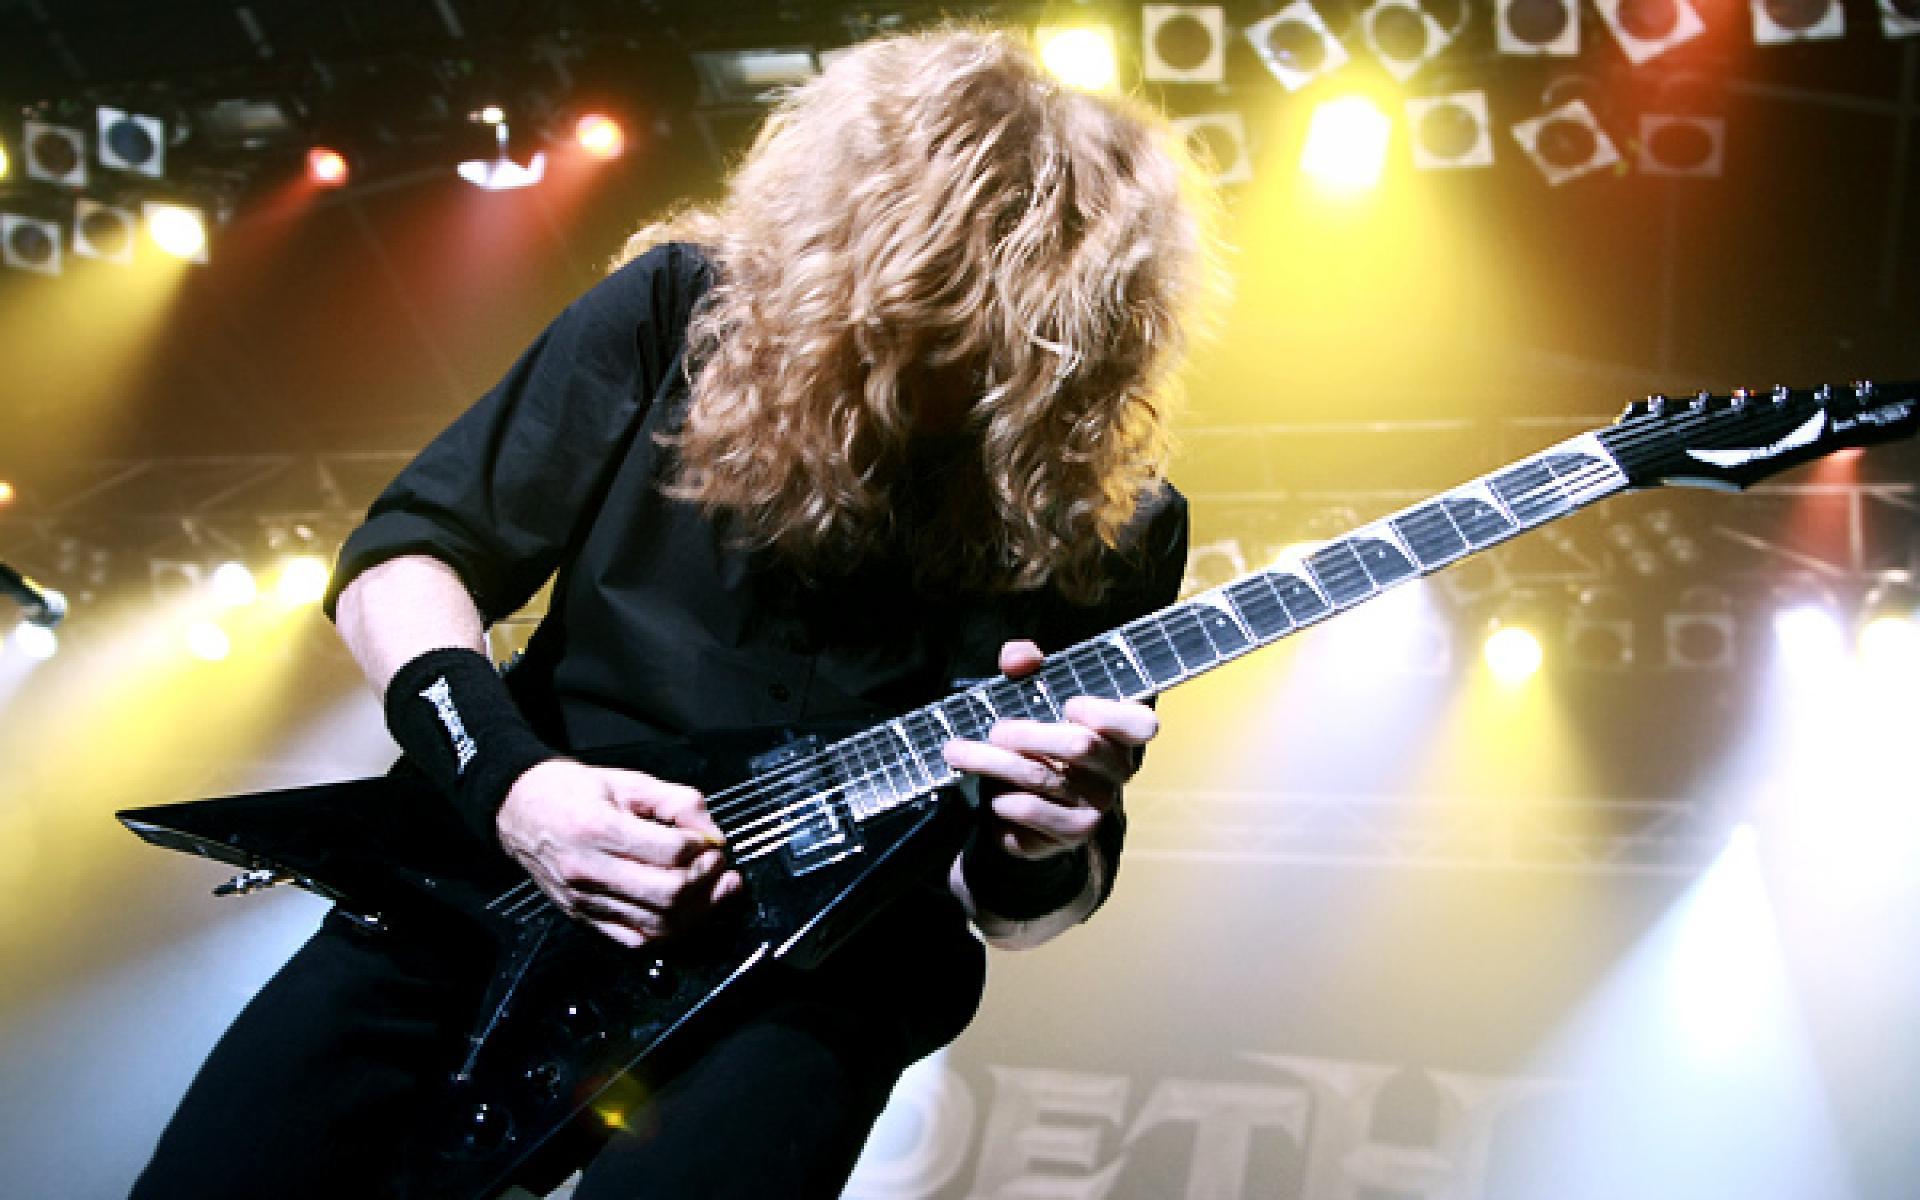 Dave Mustaine Wallpaper C27XB7 (600x400 px)